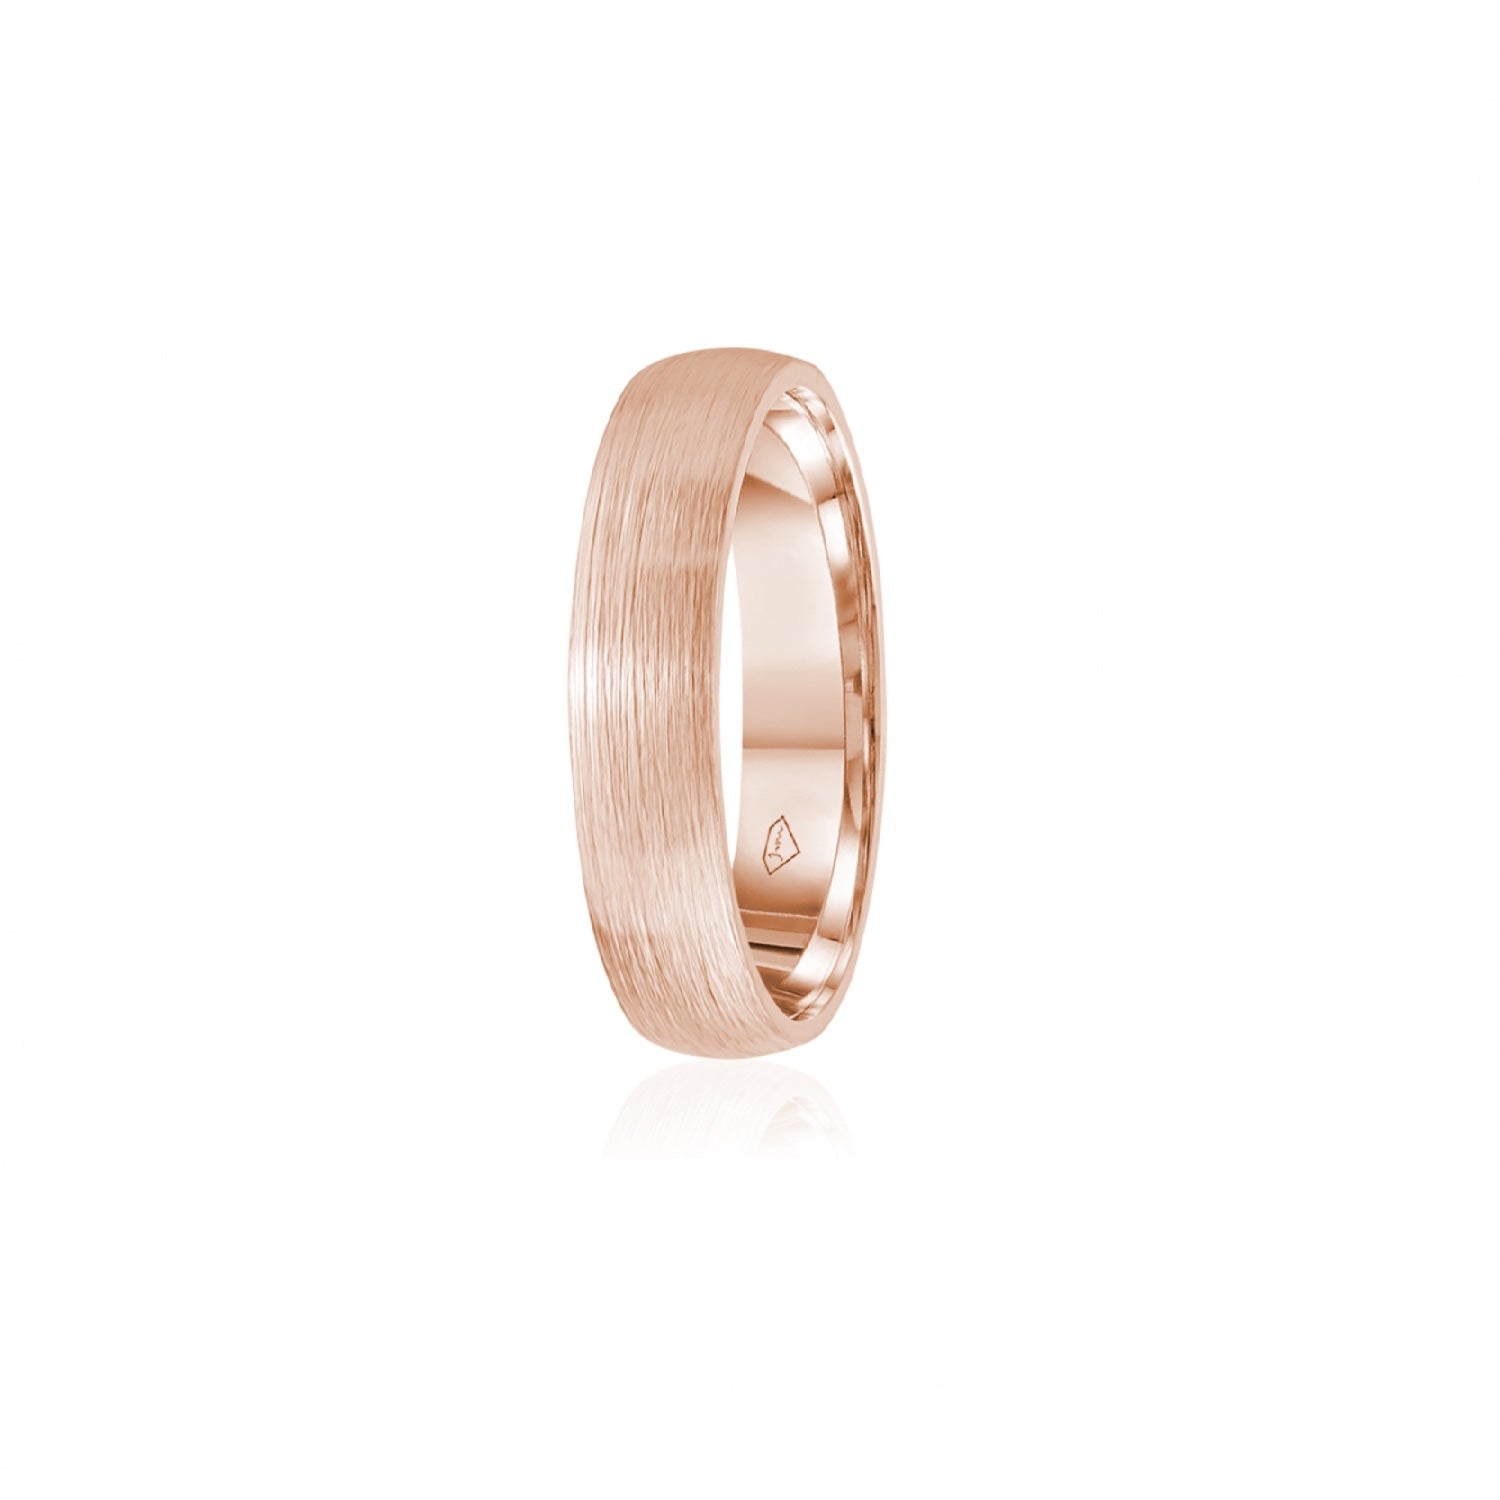 Brushed Finish Comfort Fit 6-7 mm Wedding Band in Rose Gold